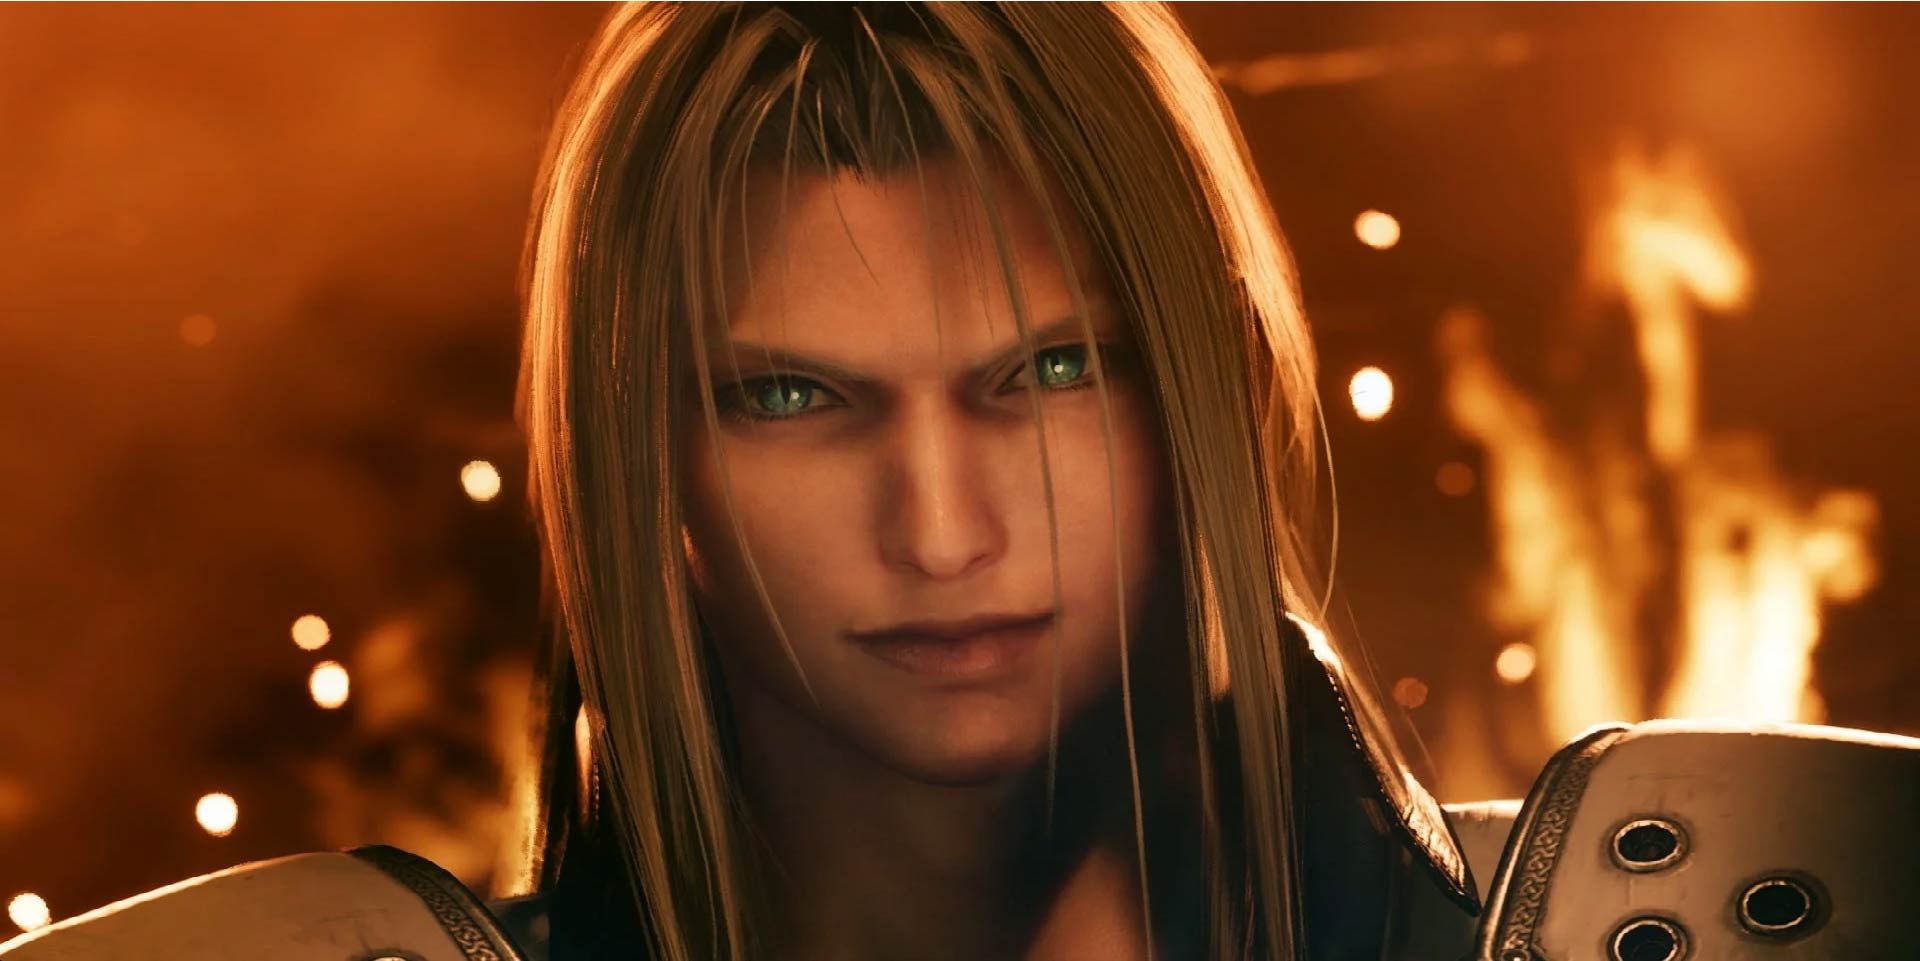 Sephiroth in the Final Fantasy VII Remake